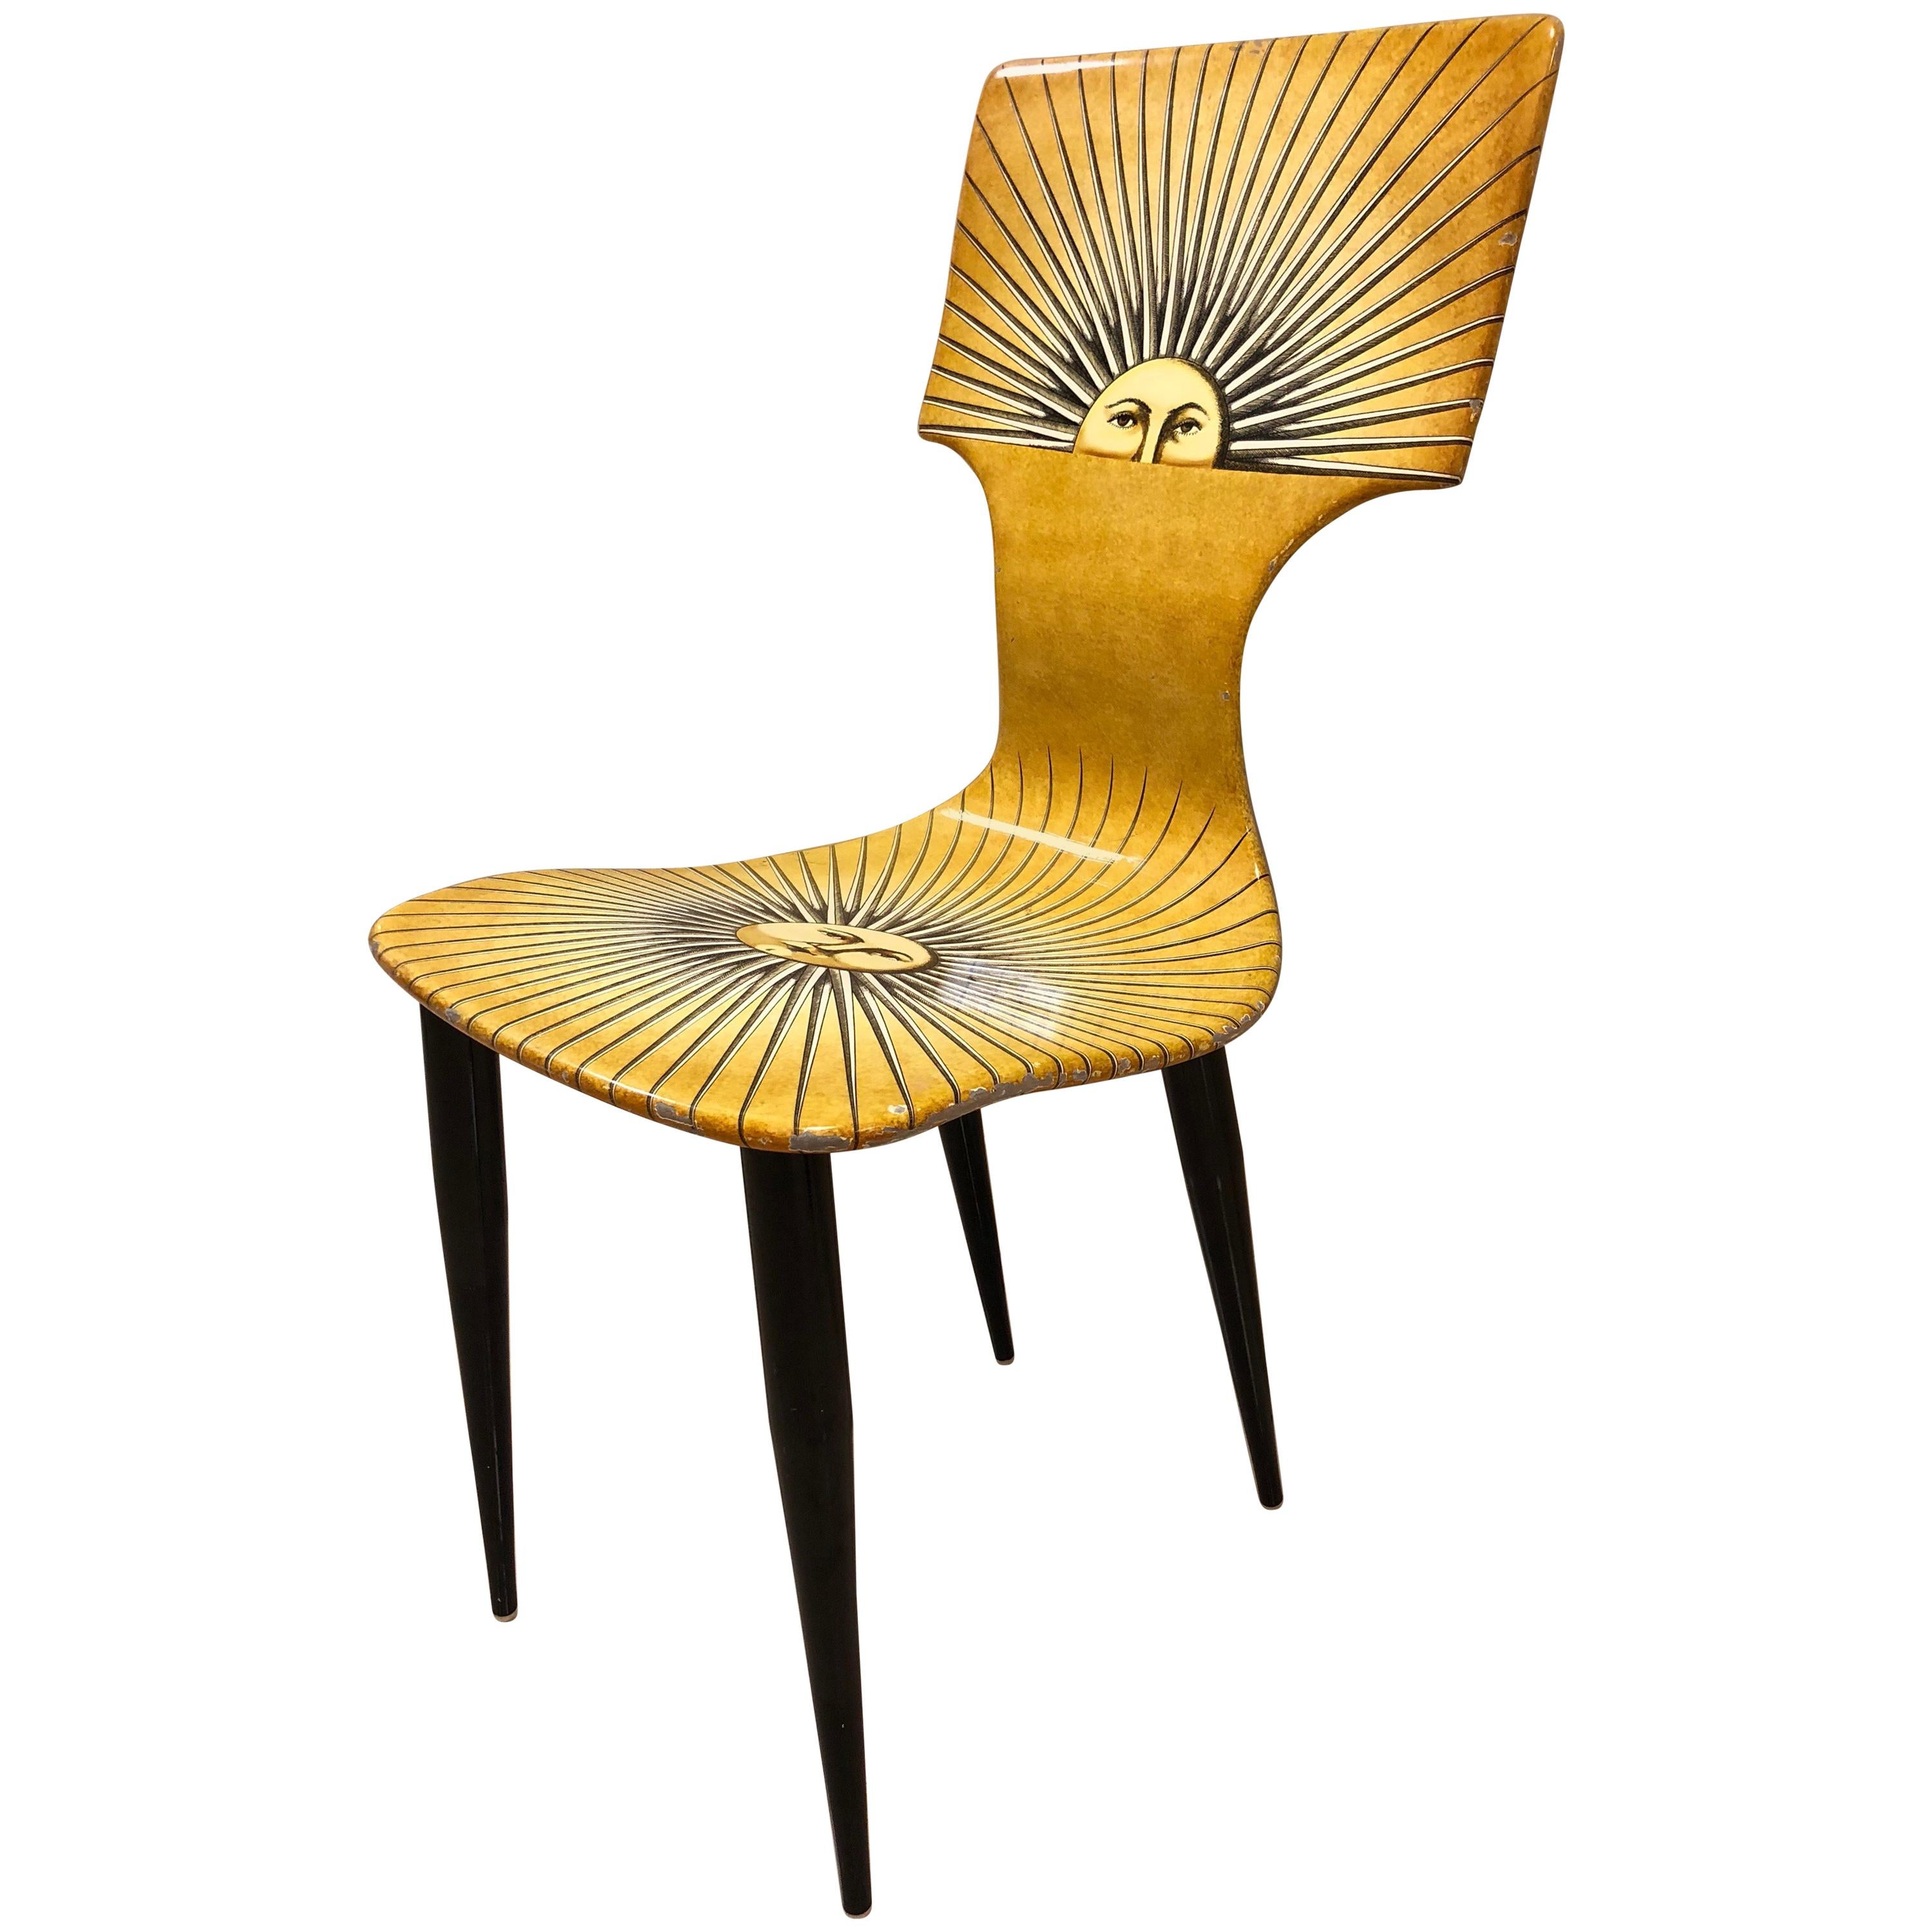 Fornasetti "Sole" Chair